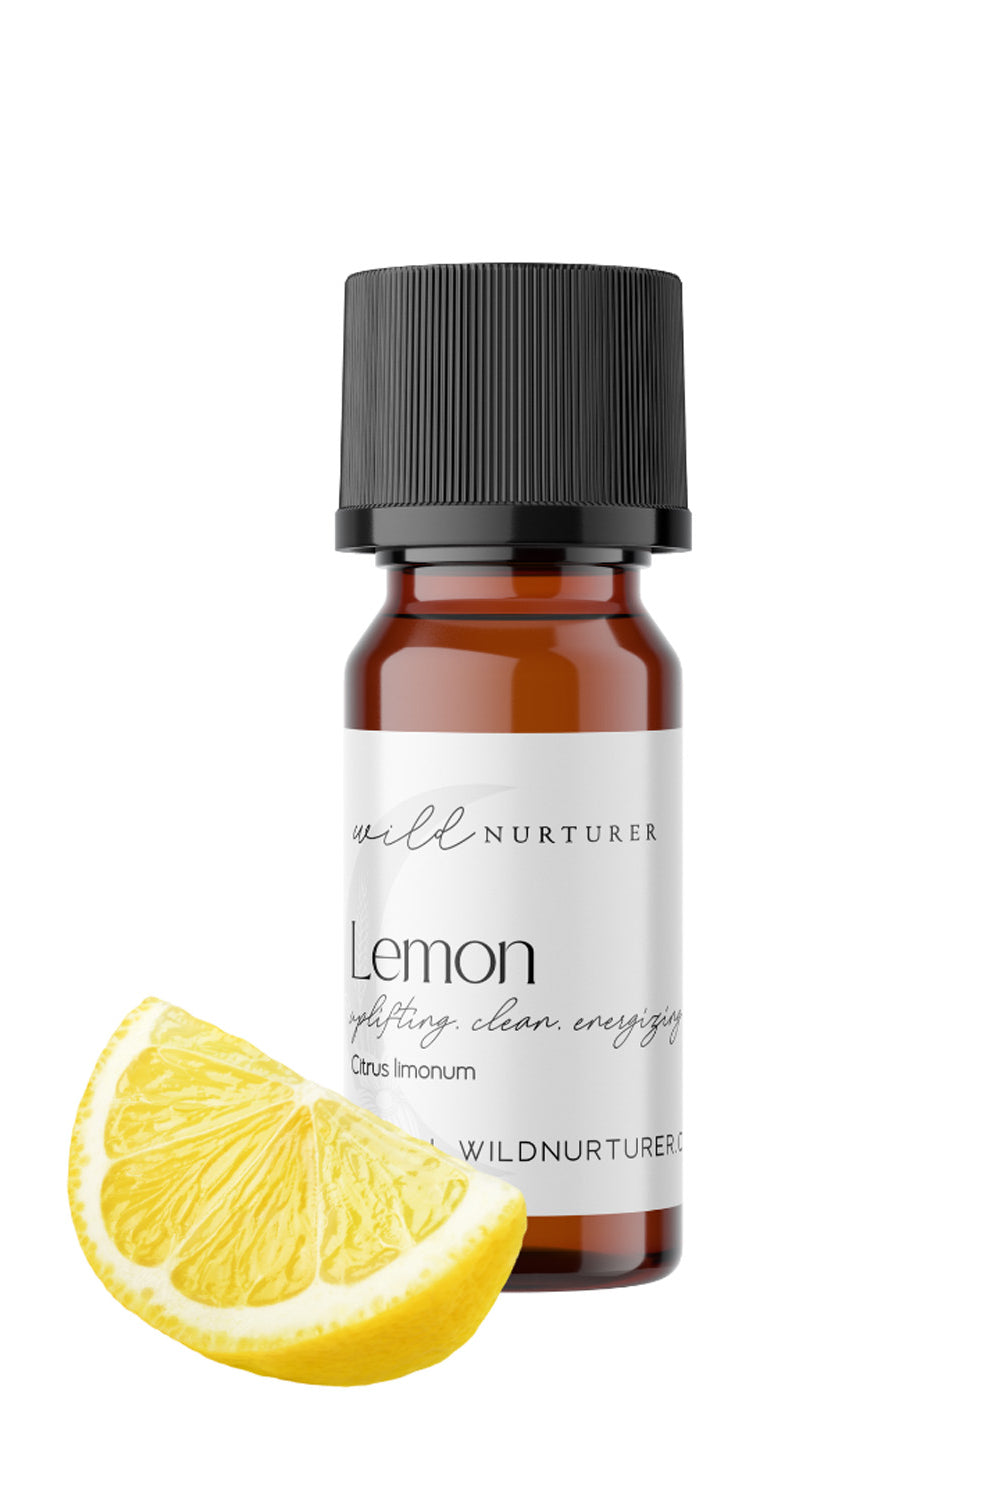 A small brown glass bottle labeled "100% Fresh & Pure Pours | Single Note Organic Essential Oil Collection lemon" with a black cap beside a fresh lemon wedge on a white background, by Wild Nurturer Aromatherapy.